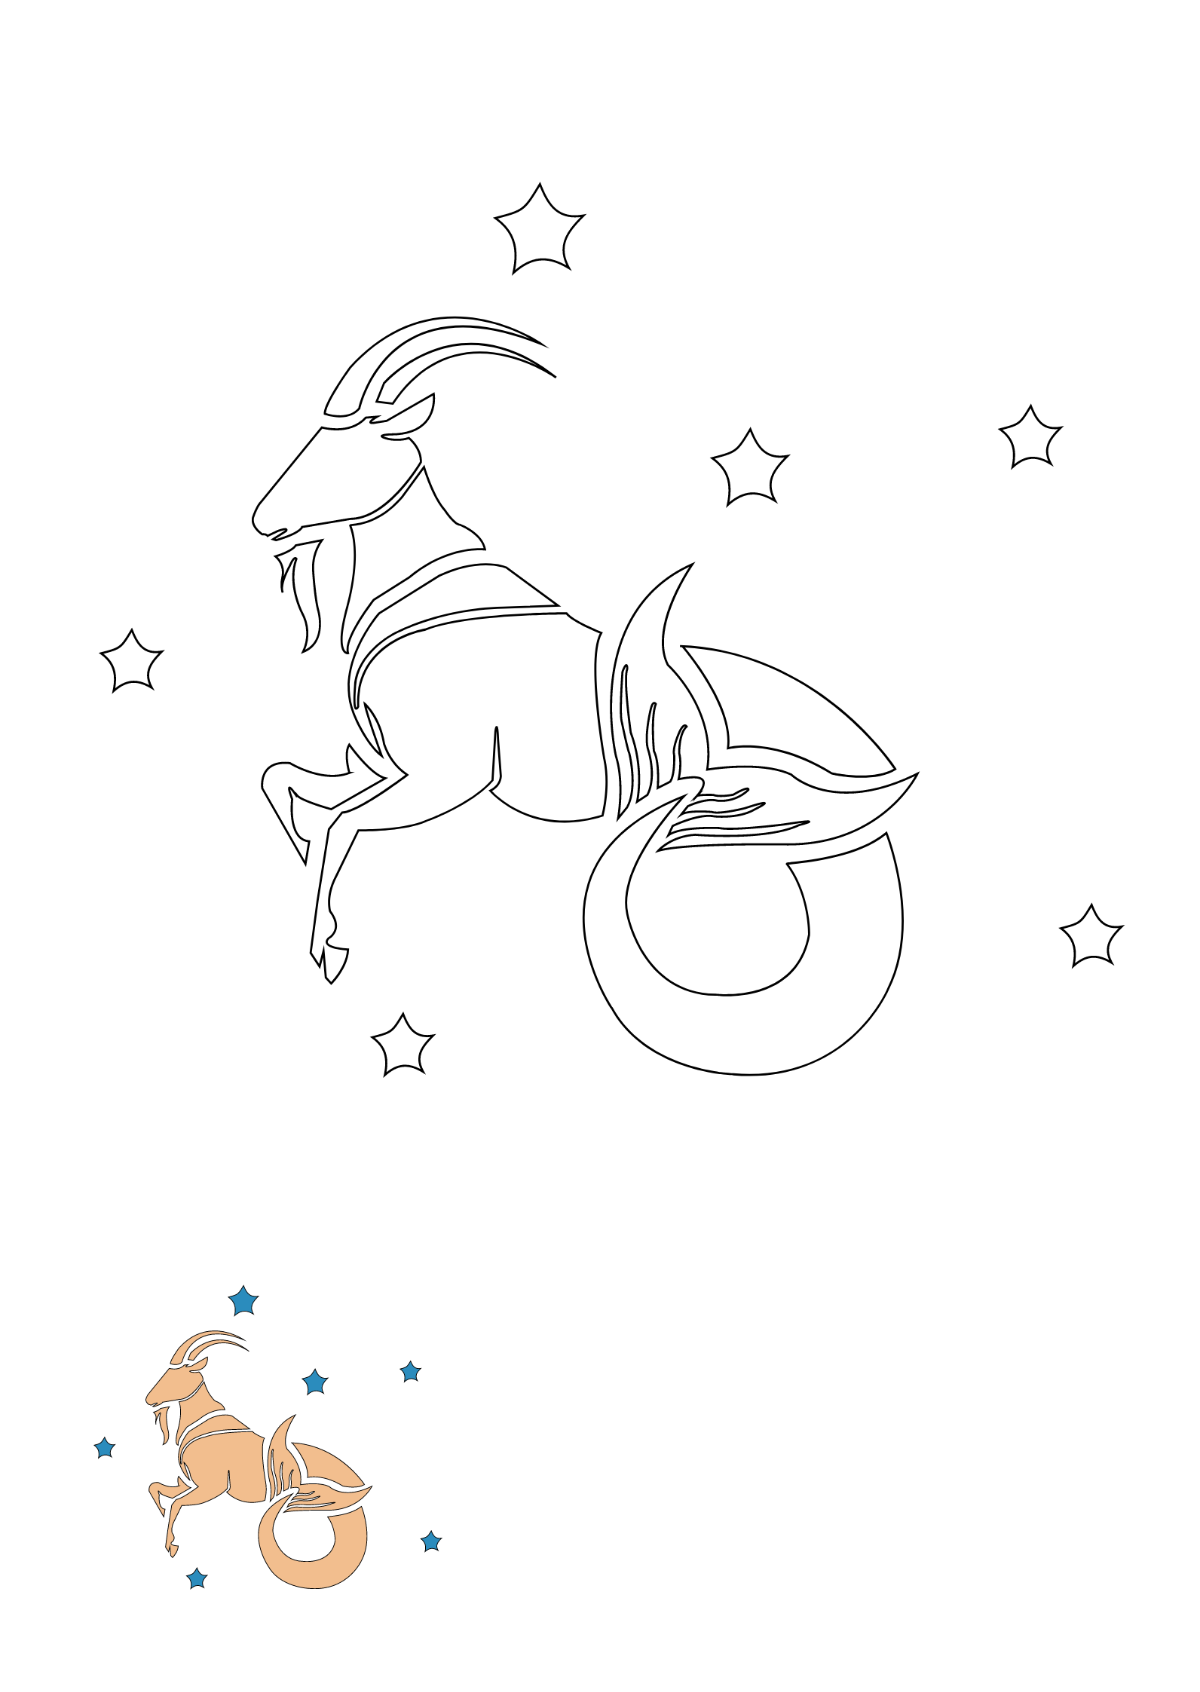 Capricorn coloring page With Stars Template